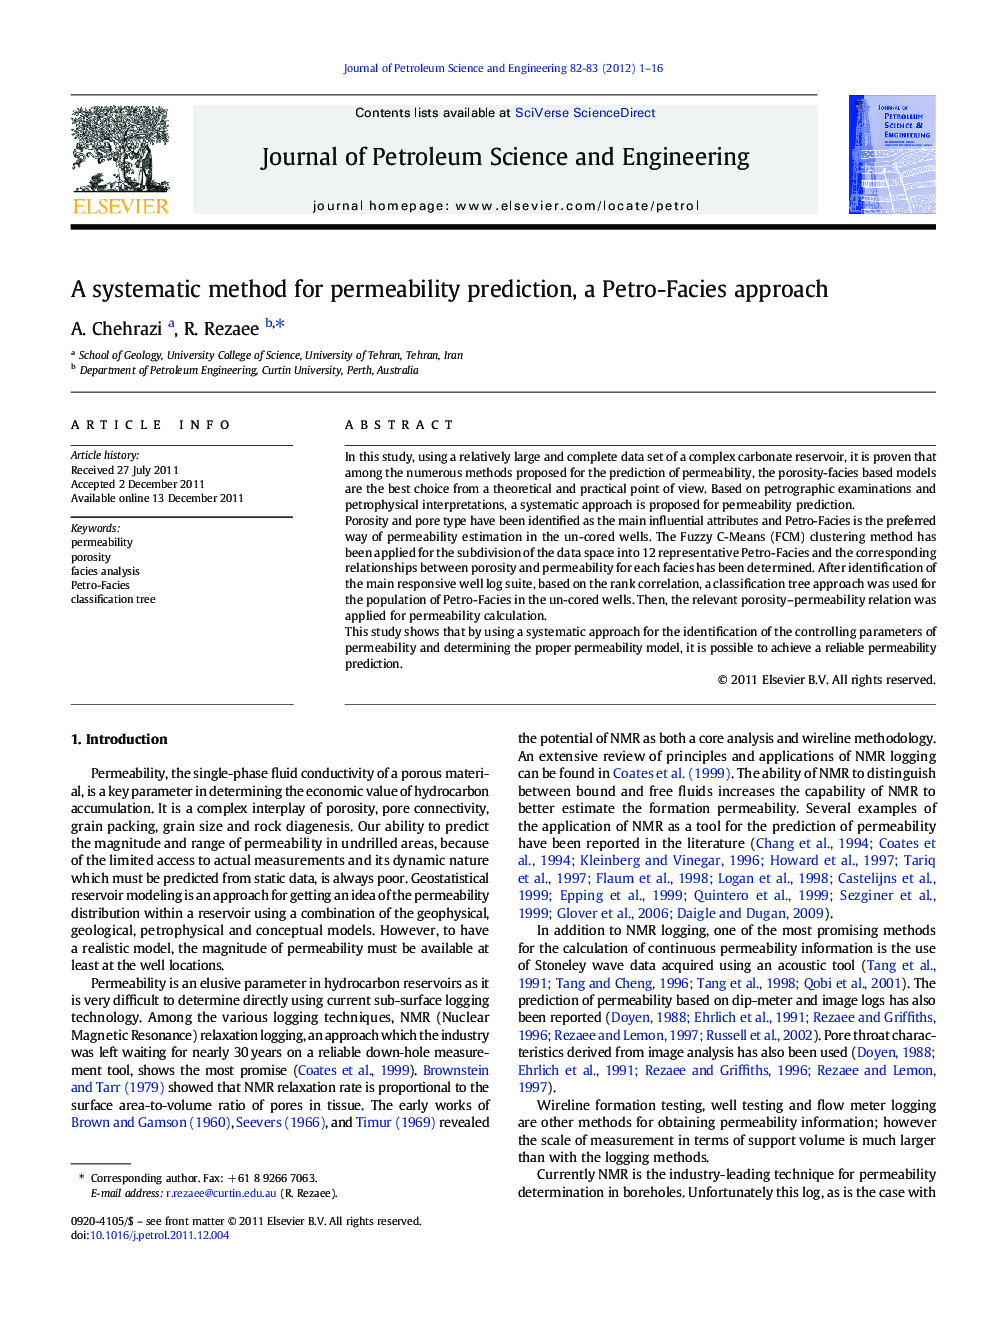 A systematic method for permeability prediction, a Petro-Facies approach